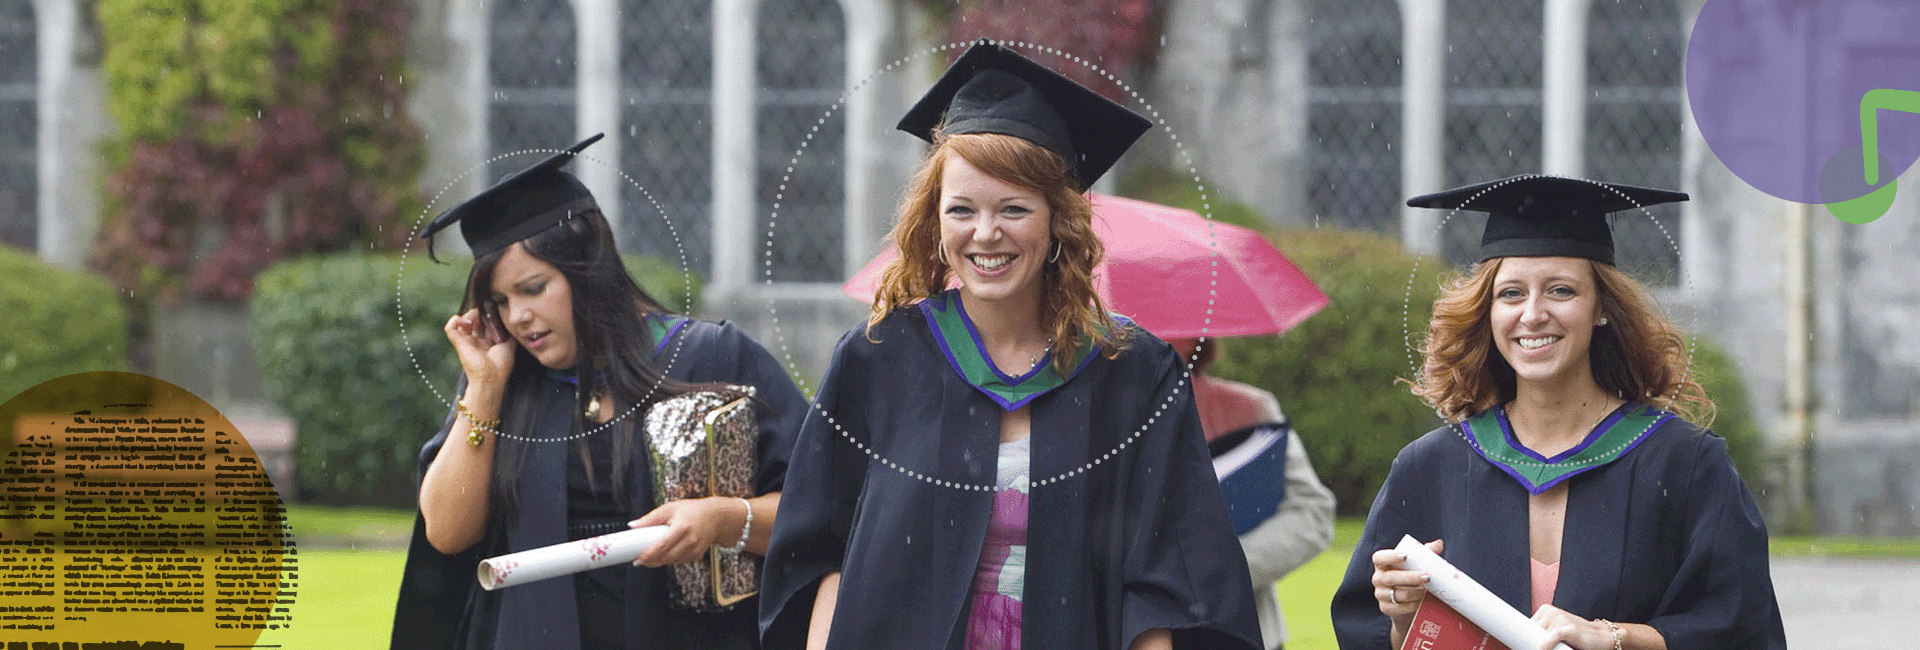 Three young women wearing graduation grounds smiling and walking through UCC campus